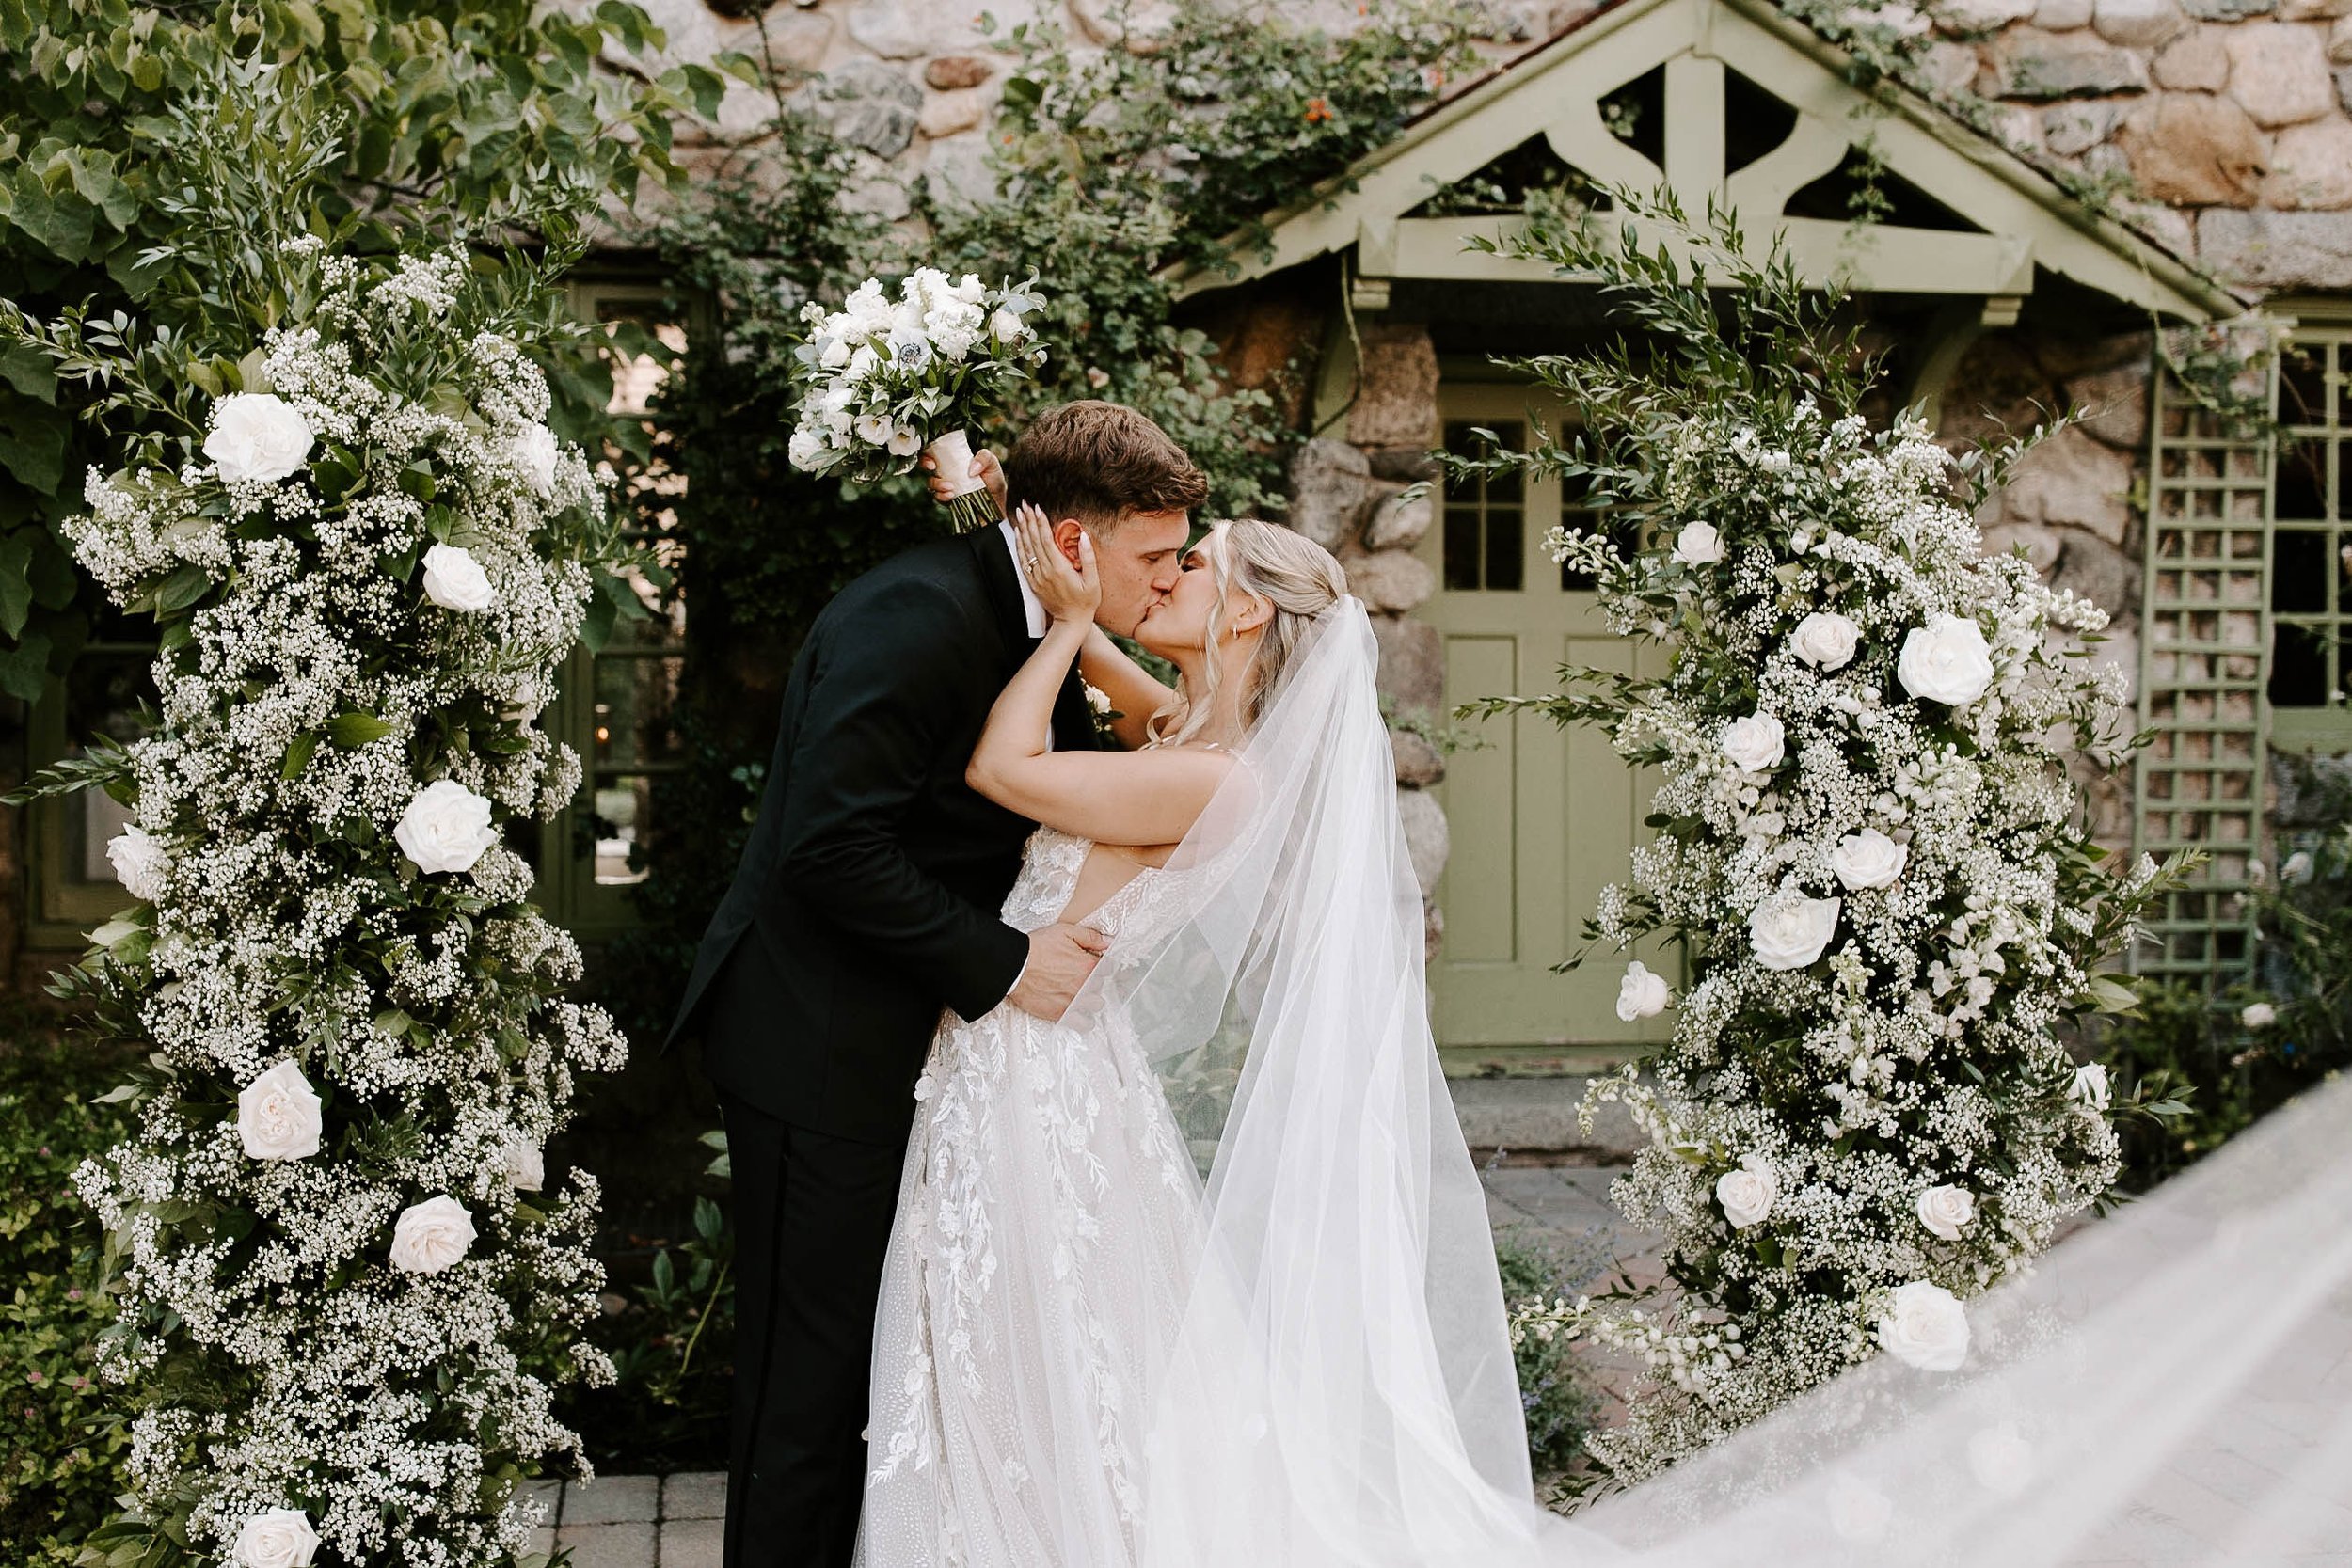 Bride and groom kissing after wedding ceremony standing in front of white and green floral arrangements